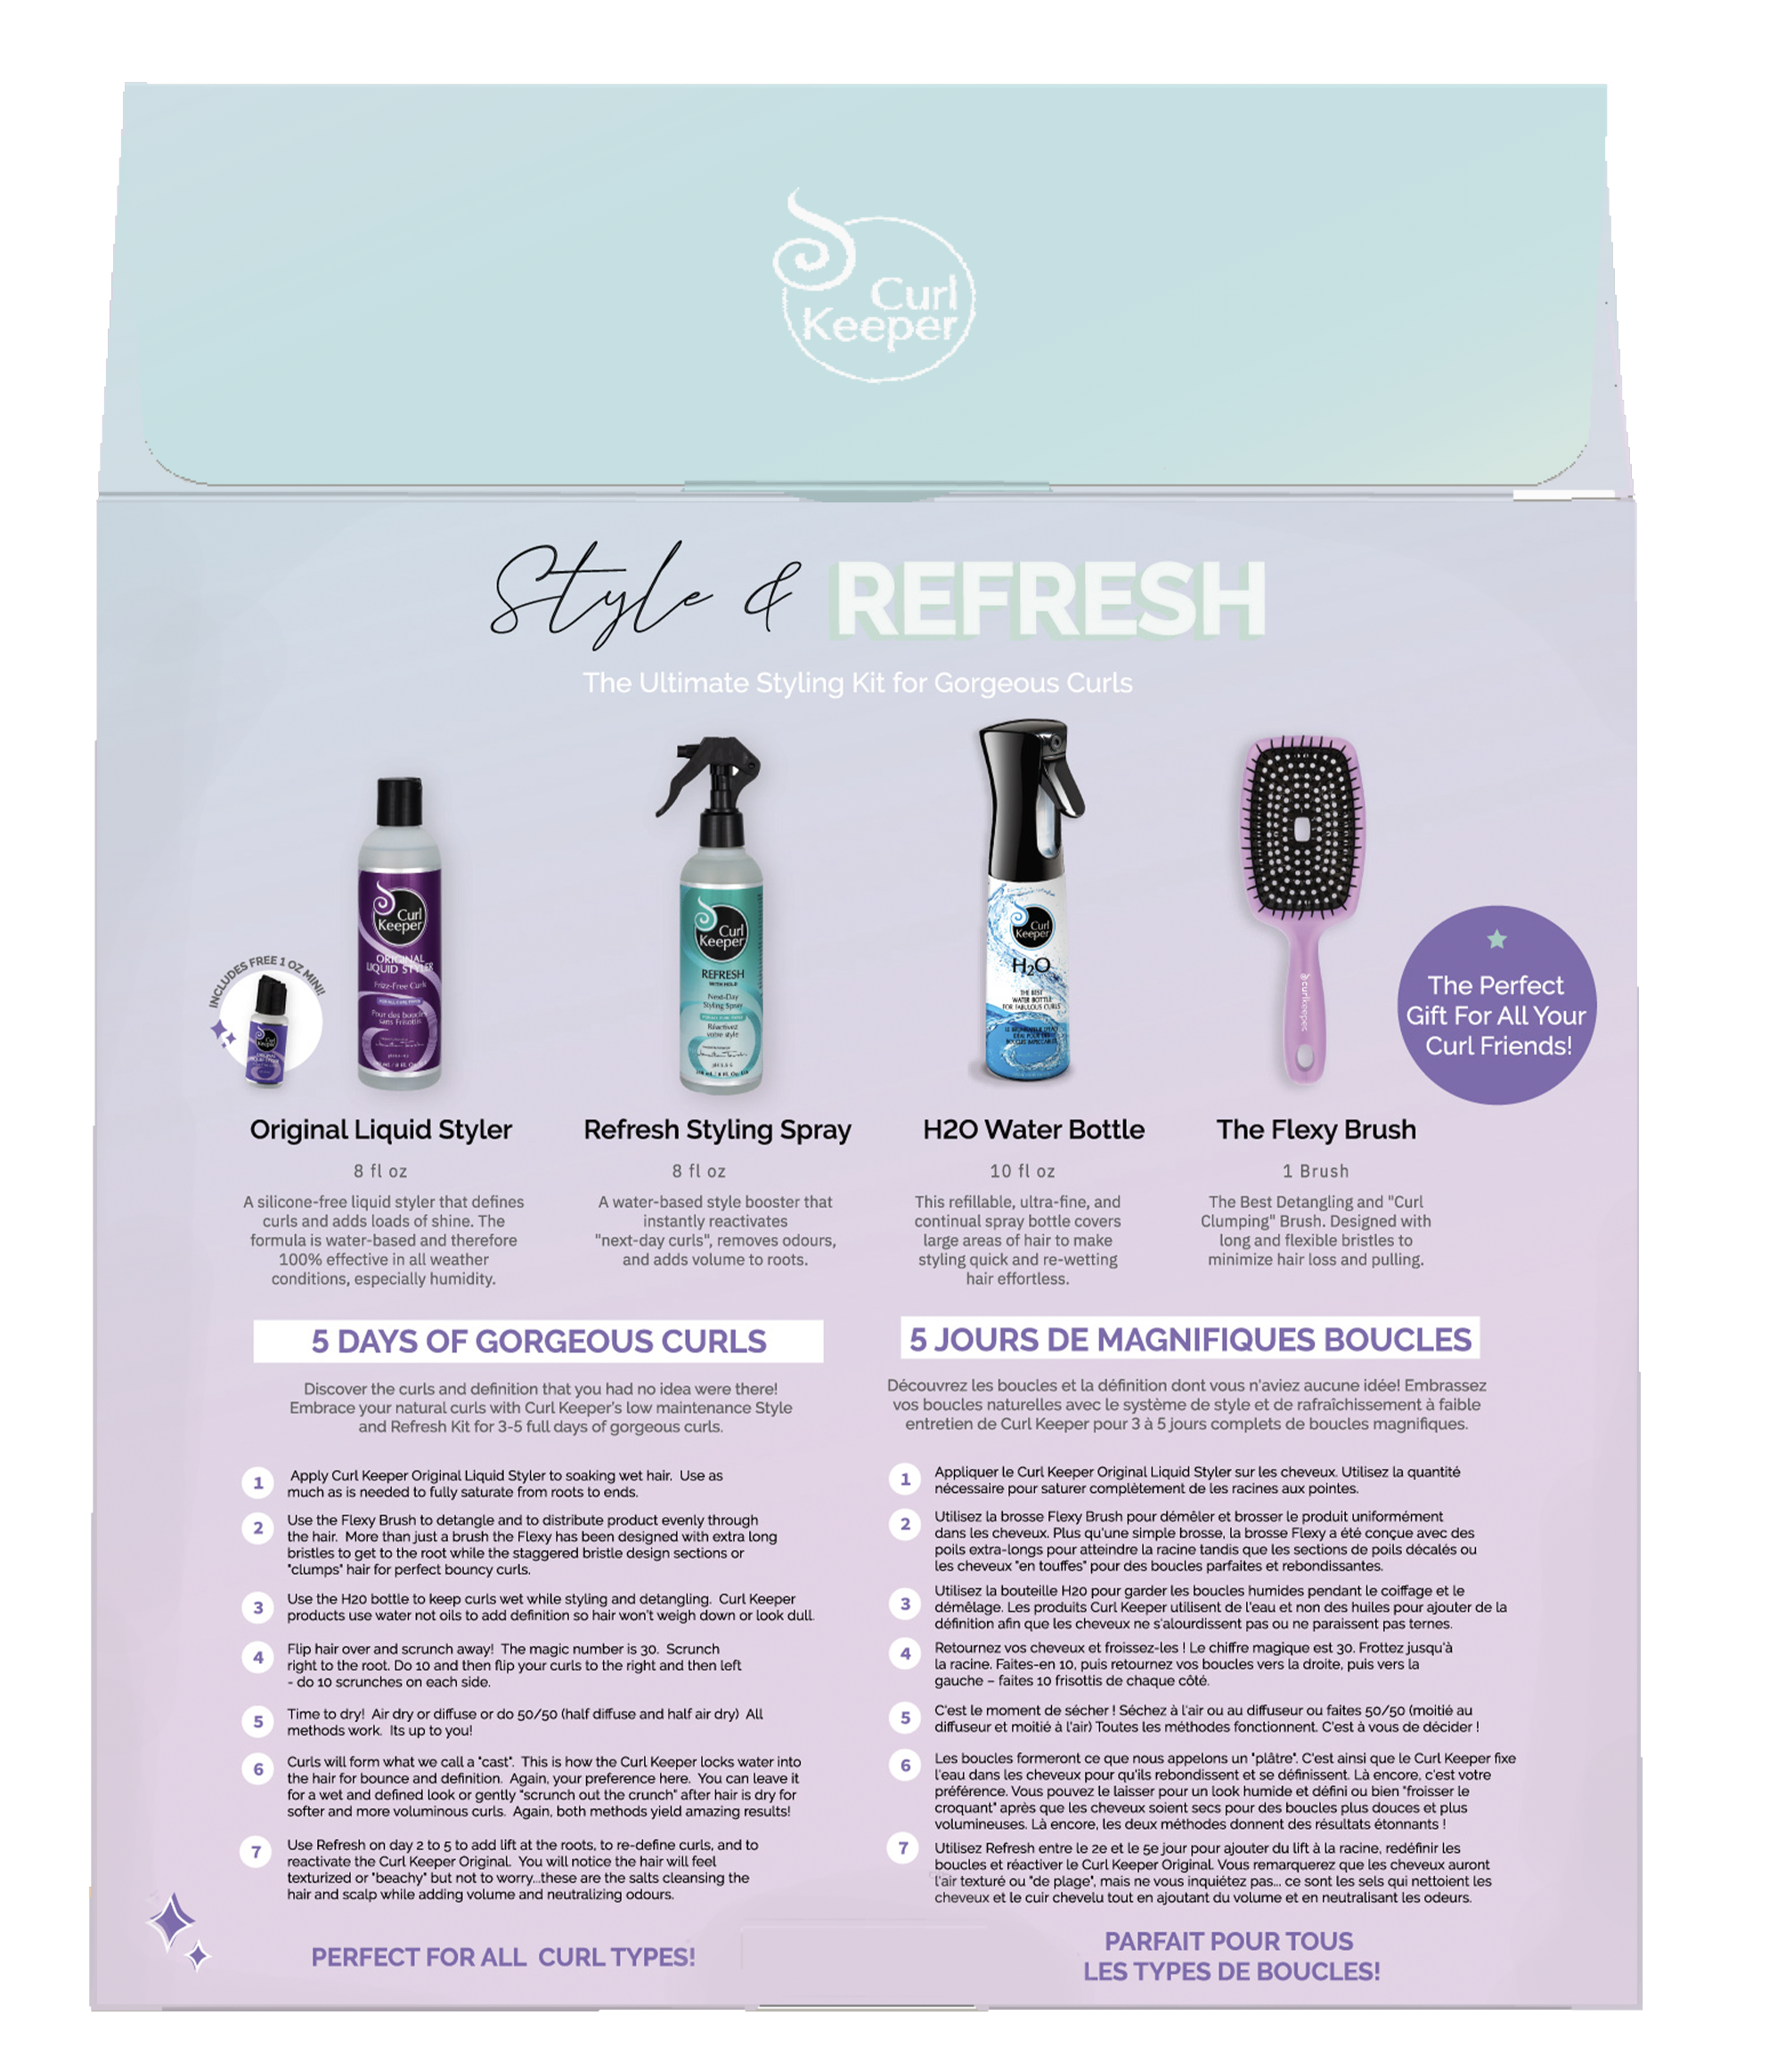 Style and Refresh Kit